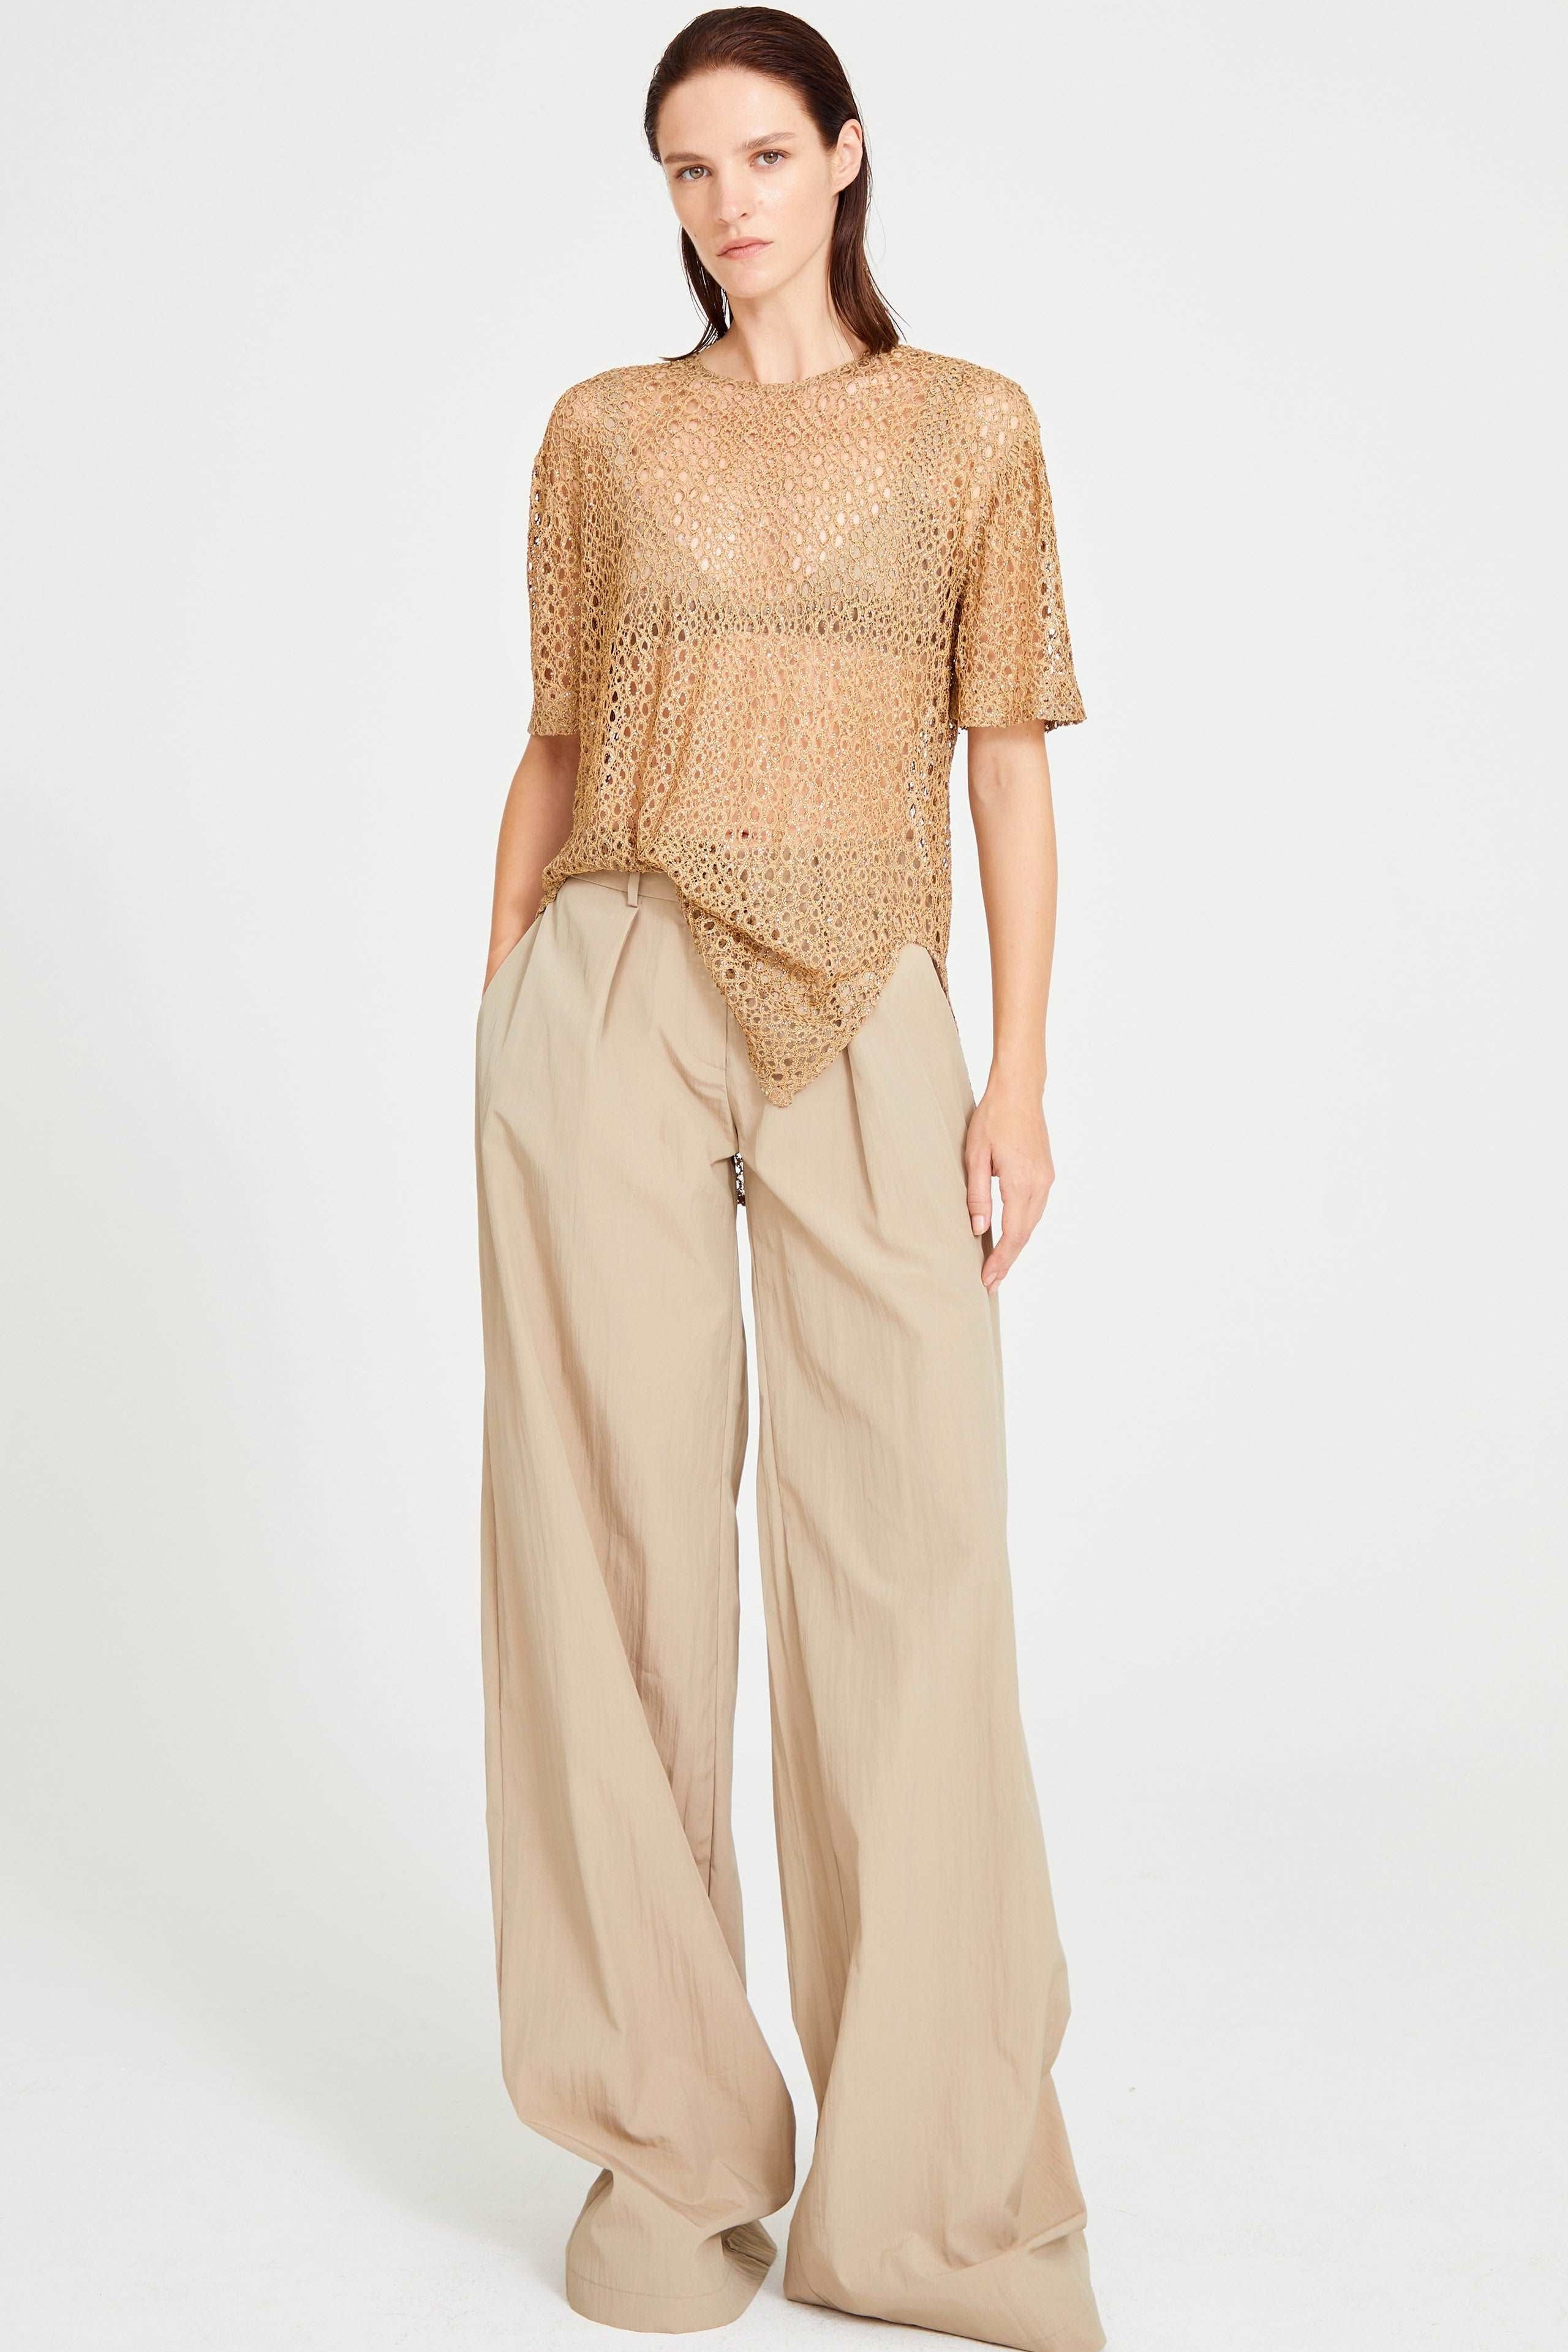 Beige Lace Crochet Top With Embroidery Details